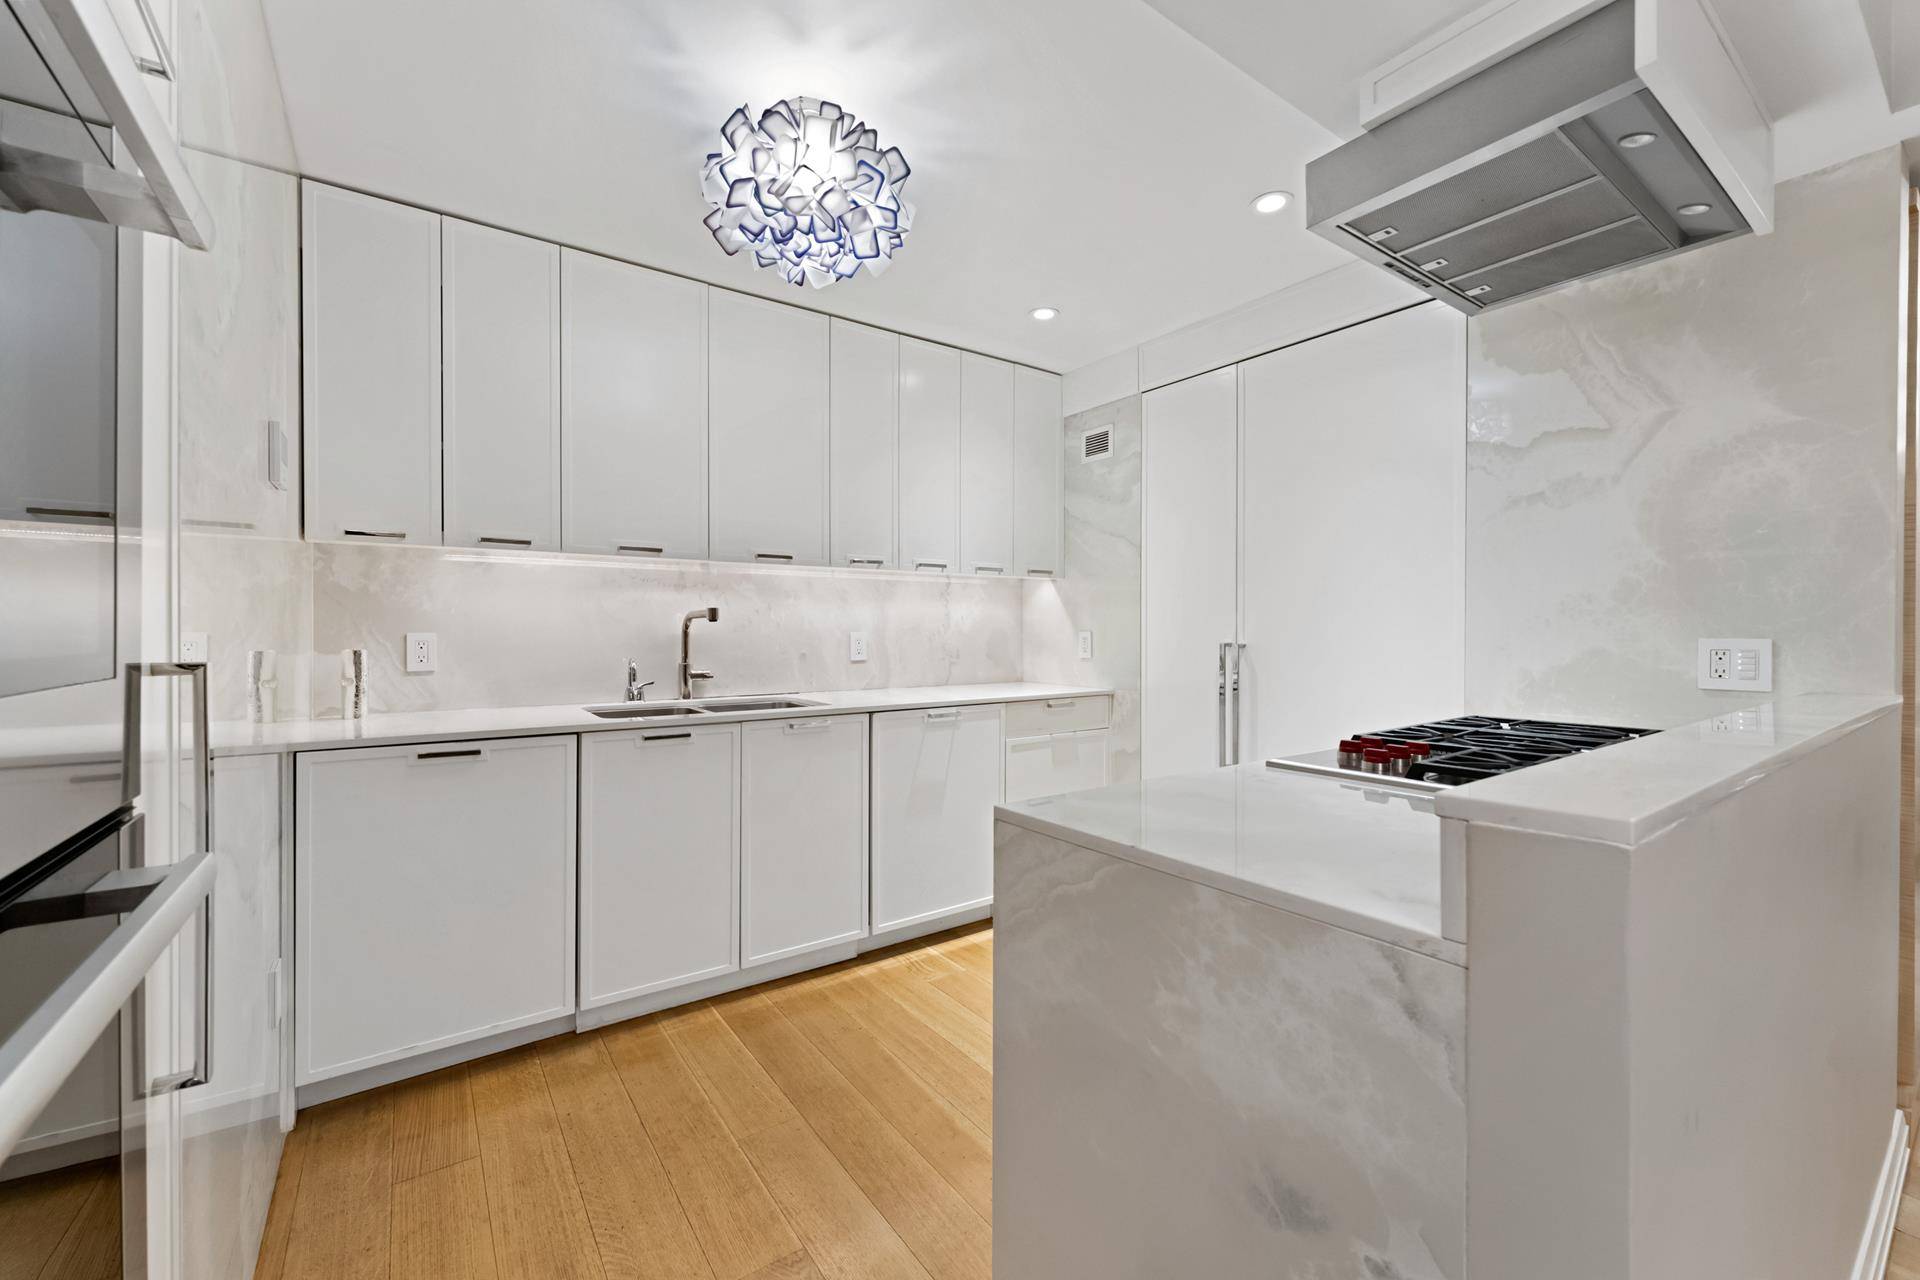 Prime Carnegie Hill location and just 300 feet from Central Park is this XXX MINT Pre War 2 Bedroom, 2 Bath condominium designed by Rosario Candela.